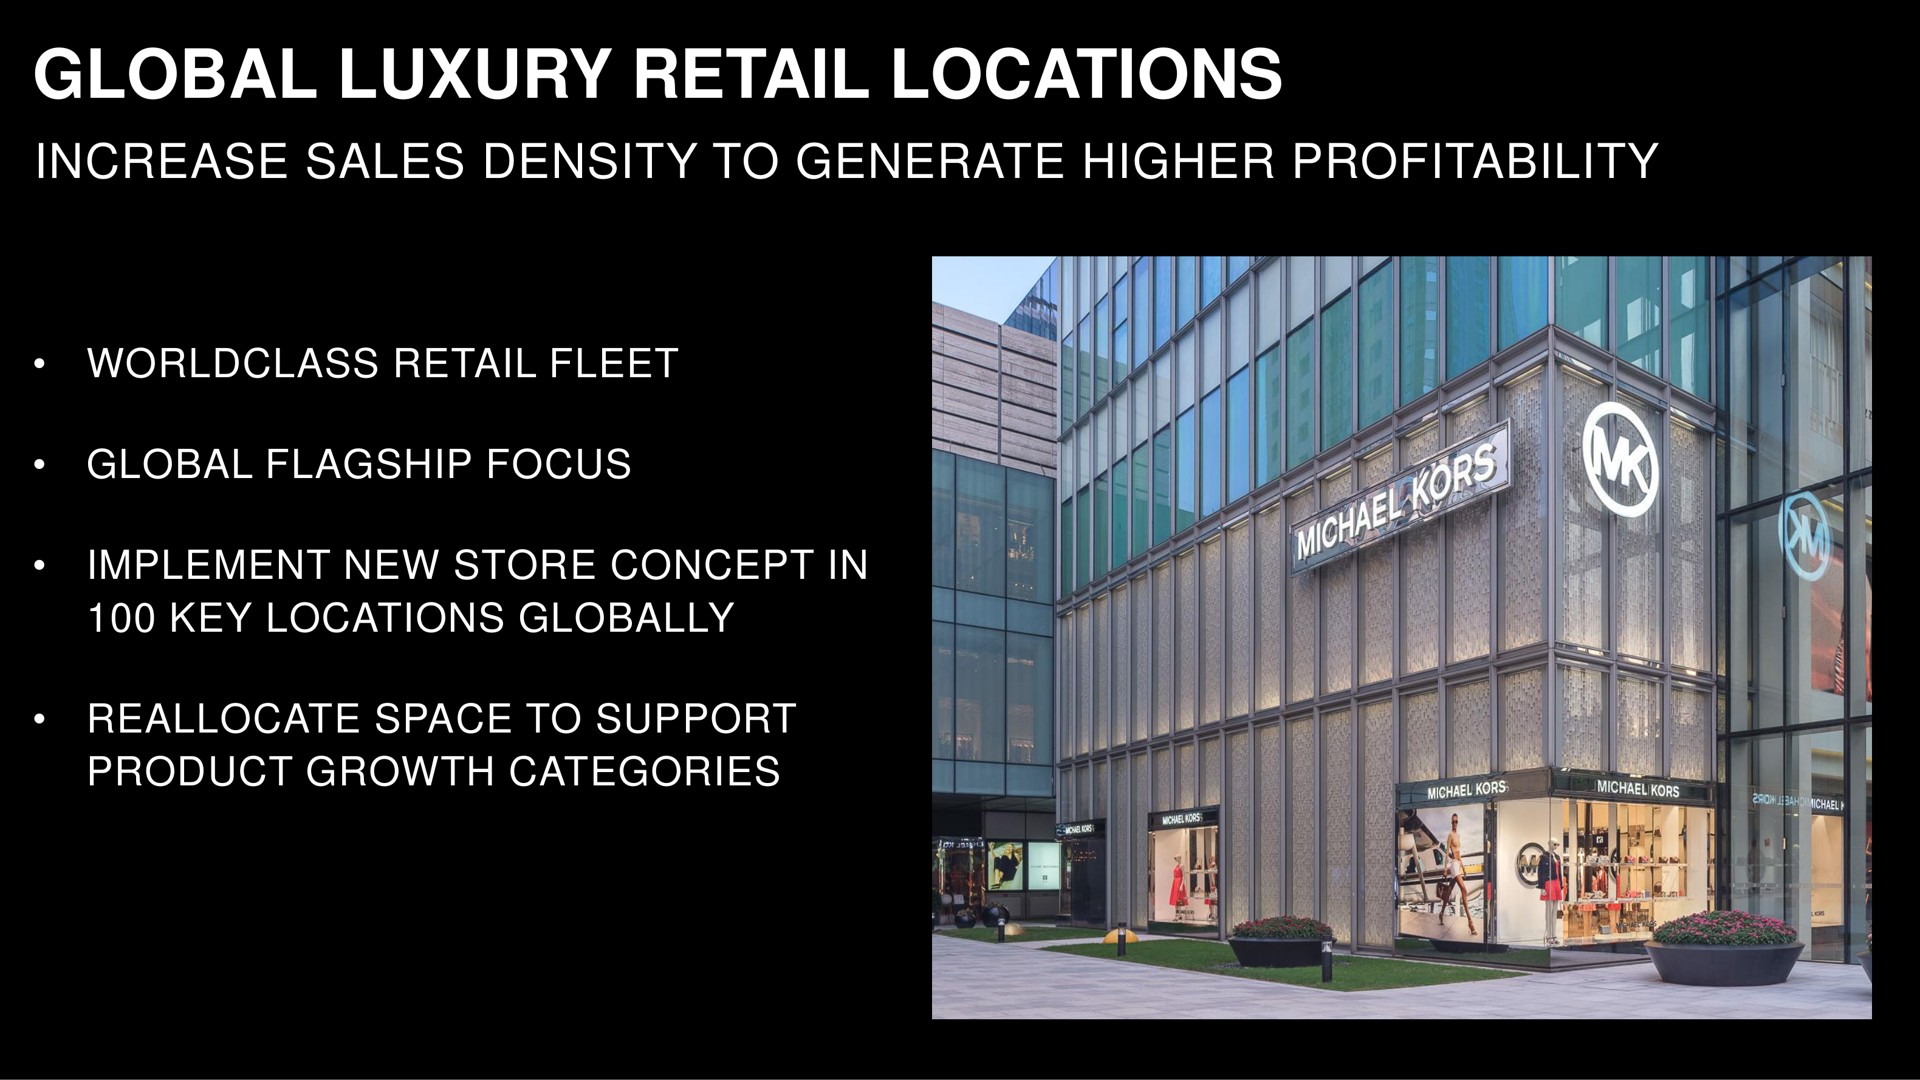 global luxury retail locations increase sales density to generate higher profitability fleet flagship focus implement new store concept in key globally reallocate space to support product growth categories | Capri Holdings